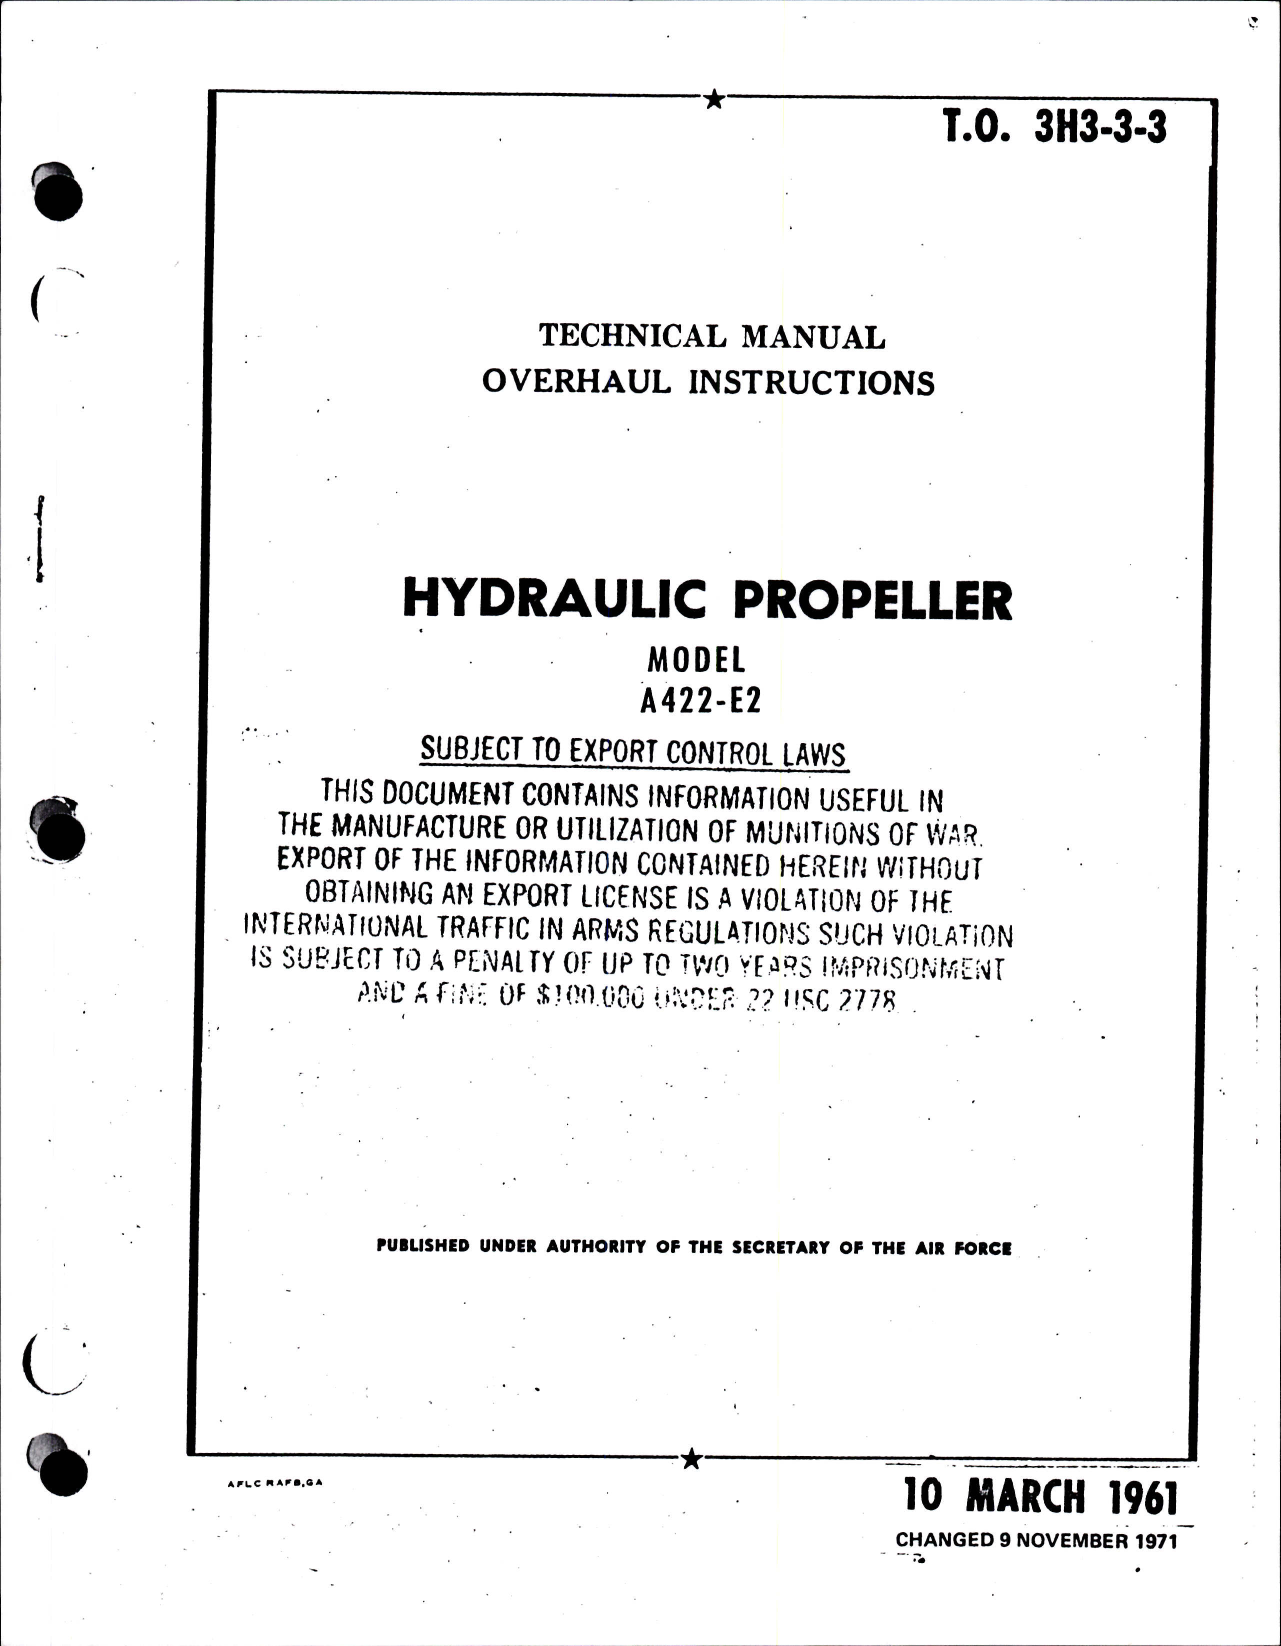 Sample page 1 from AirCorps Library document: Overhaul Instructions for Hydraulic Propeller Model A-422-E2